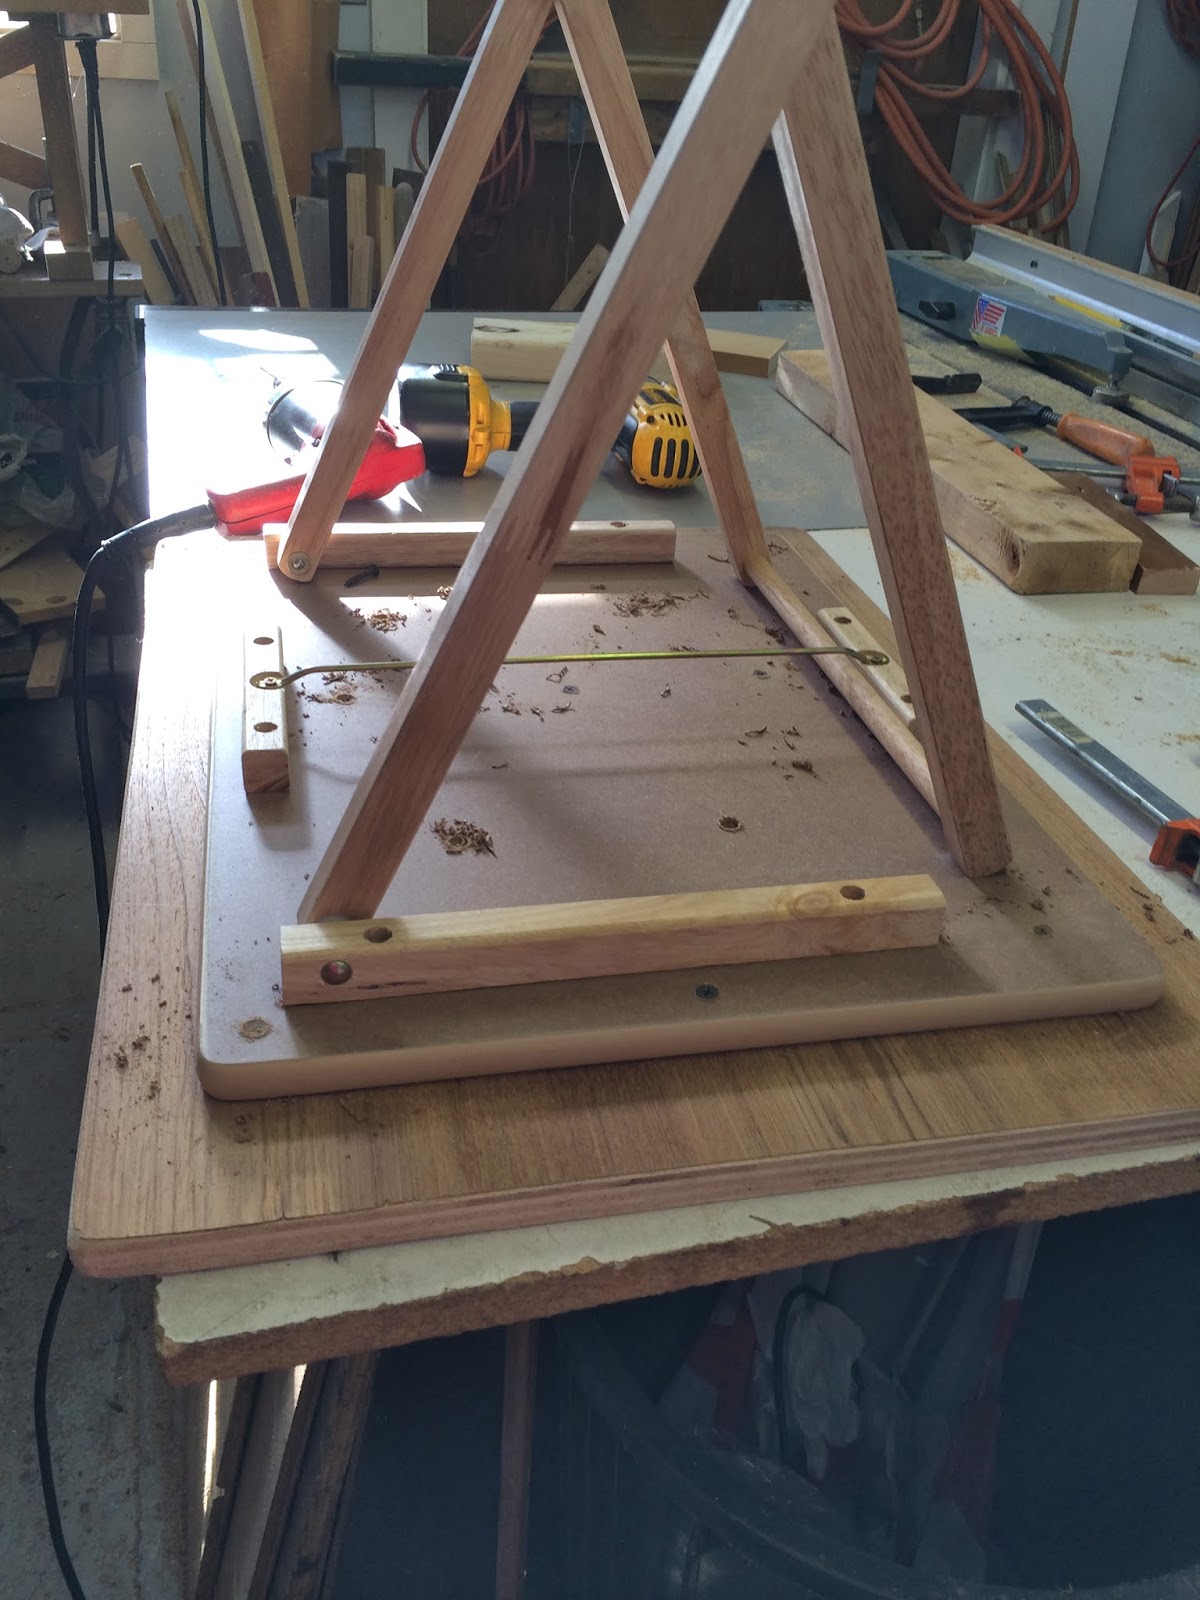 The Patchery Menagerie: Portable Ironing Table